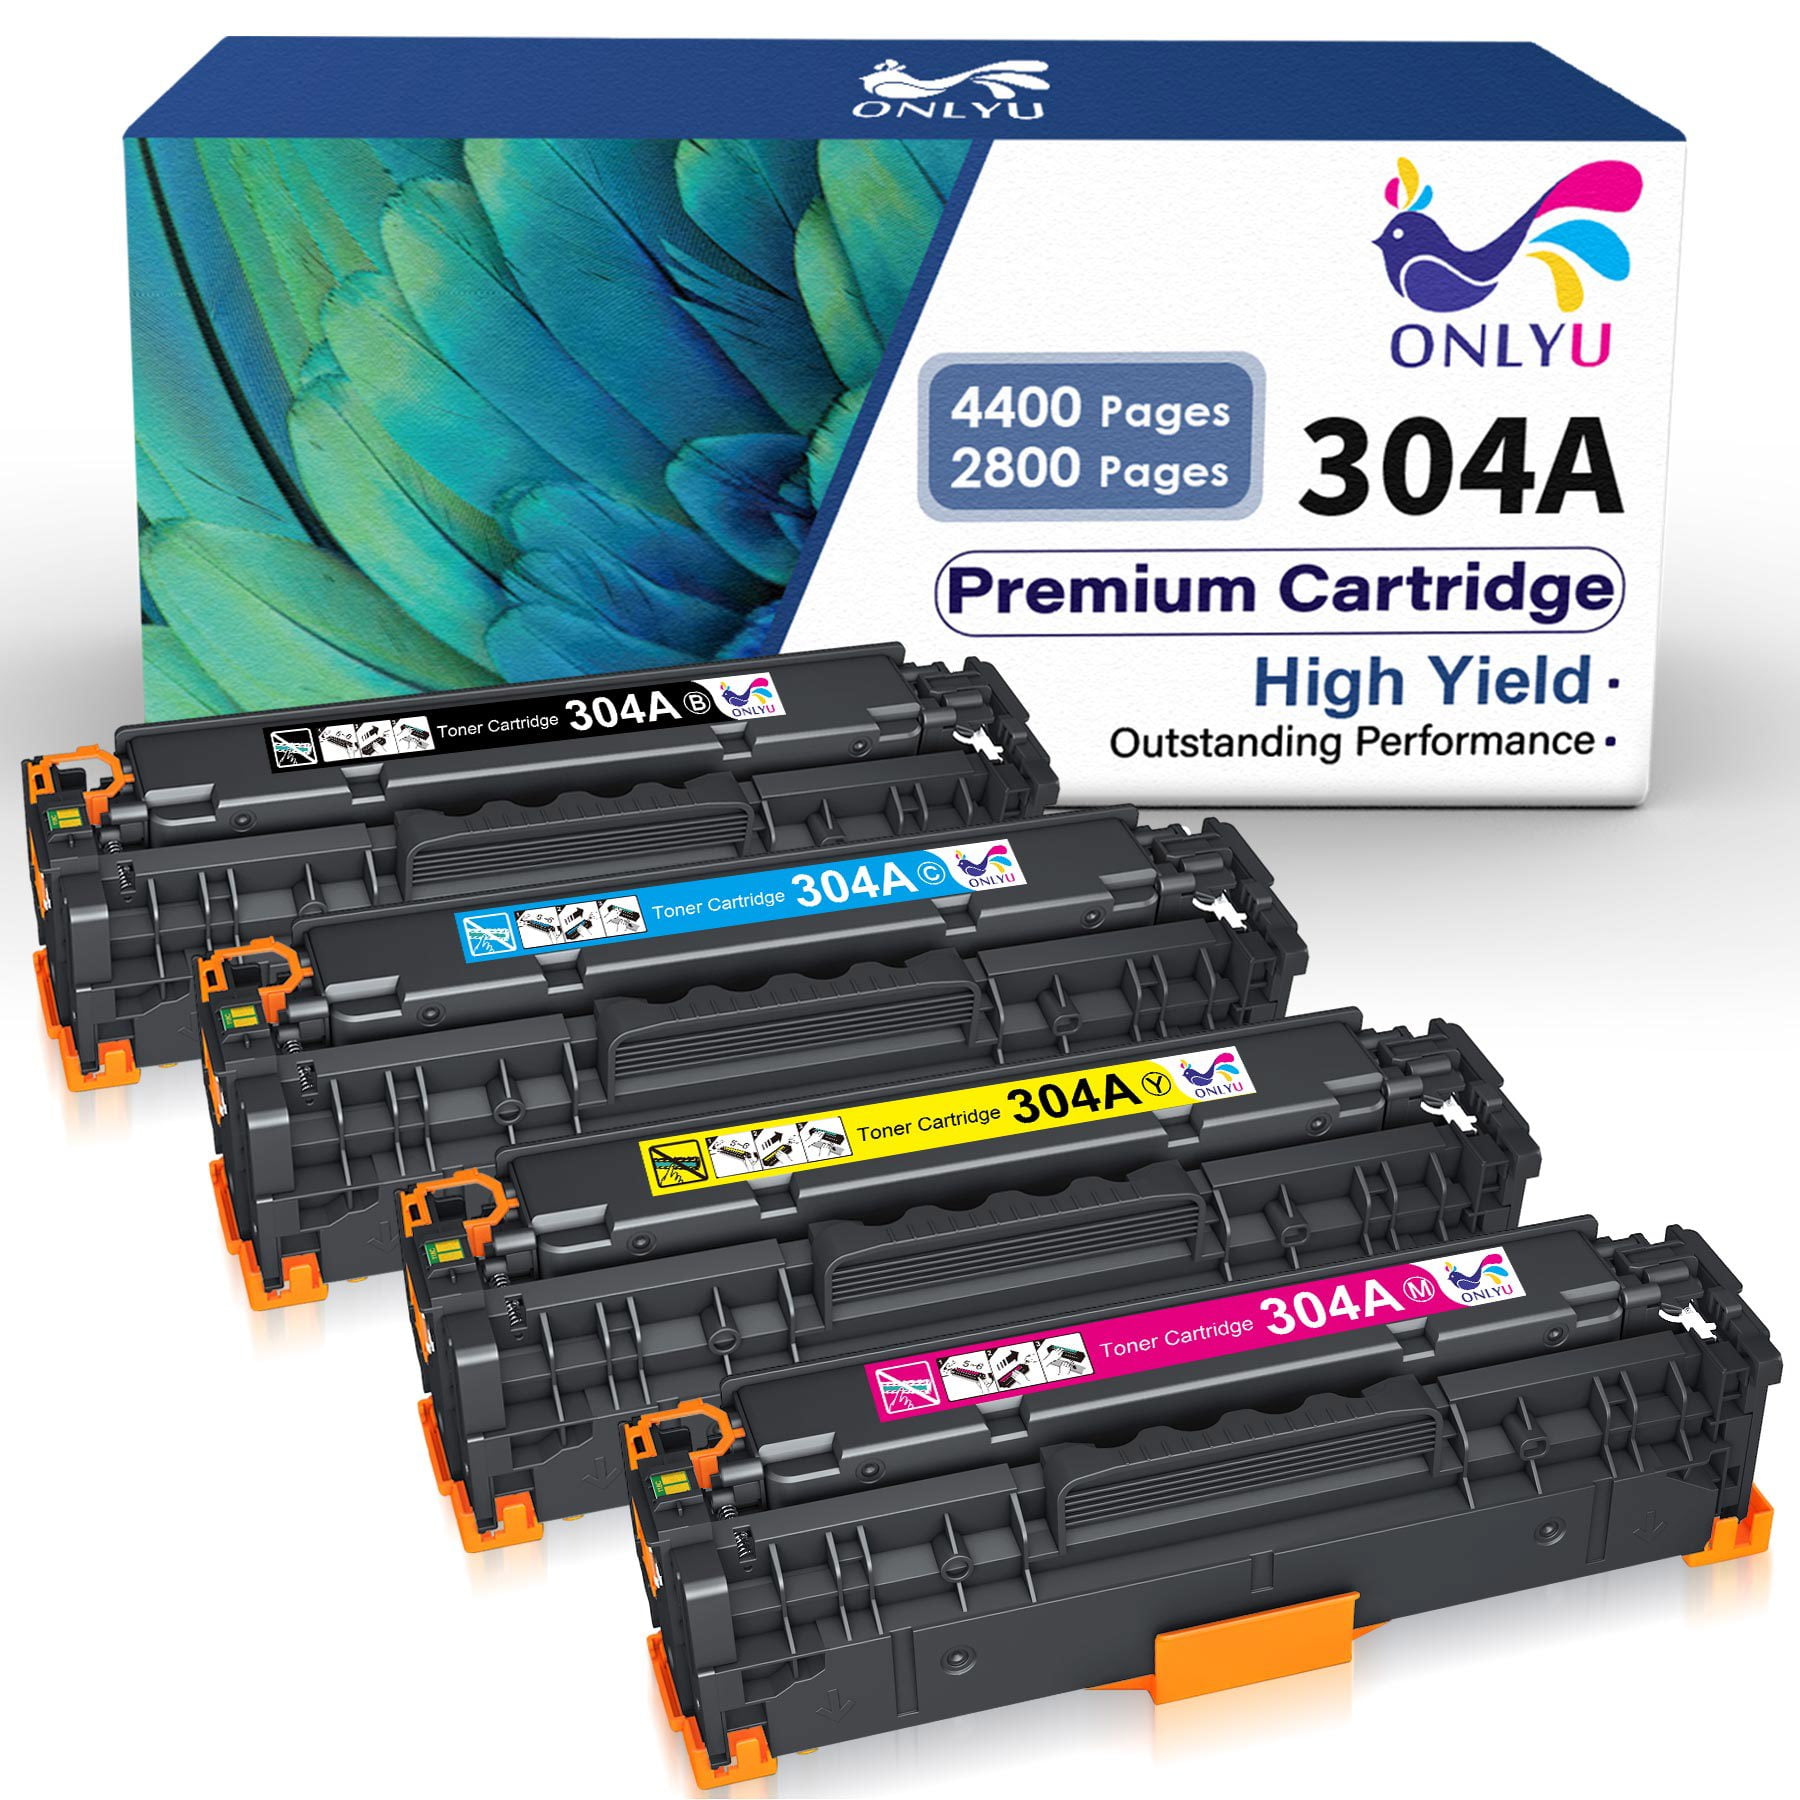  HP 304A Cyan, Magenta, Yellow Toner Cartridges (3-pack), Works  with HP Color LaserJet CM2320 MFP, HP Color LaserJet CP2025 Series